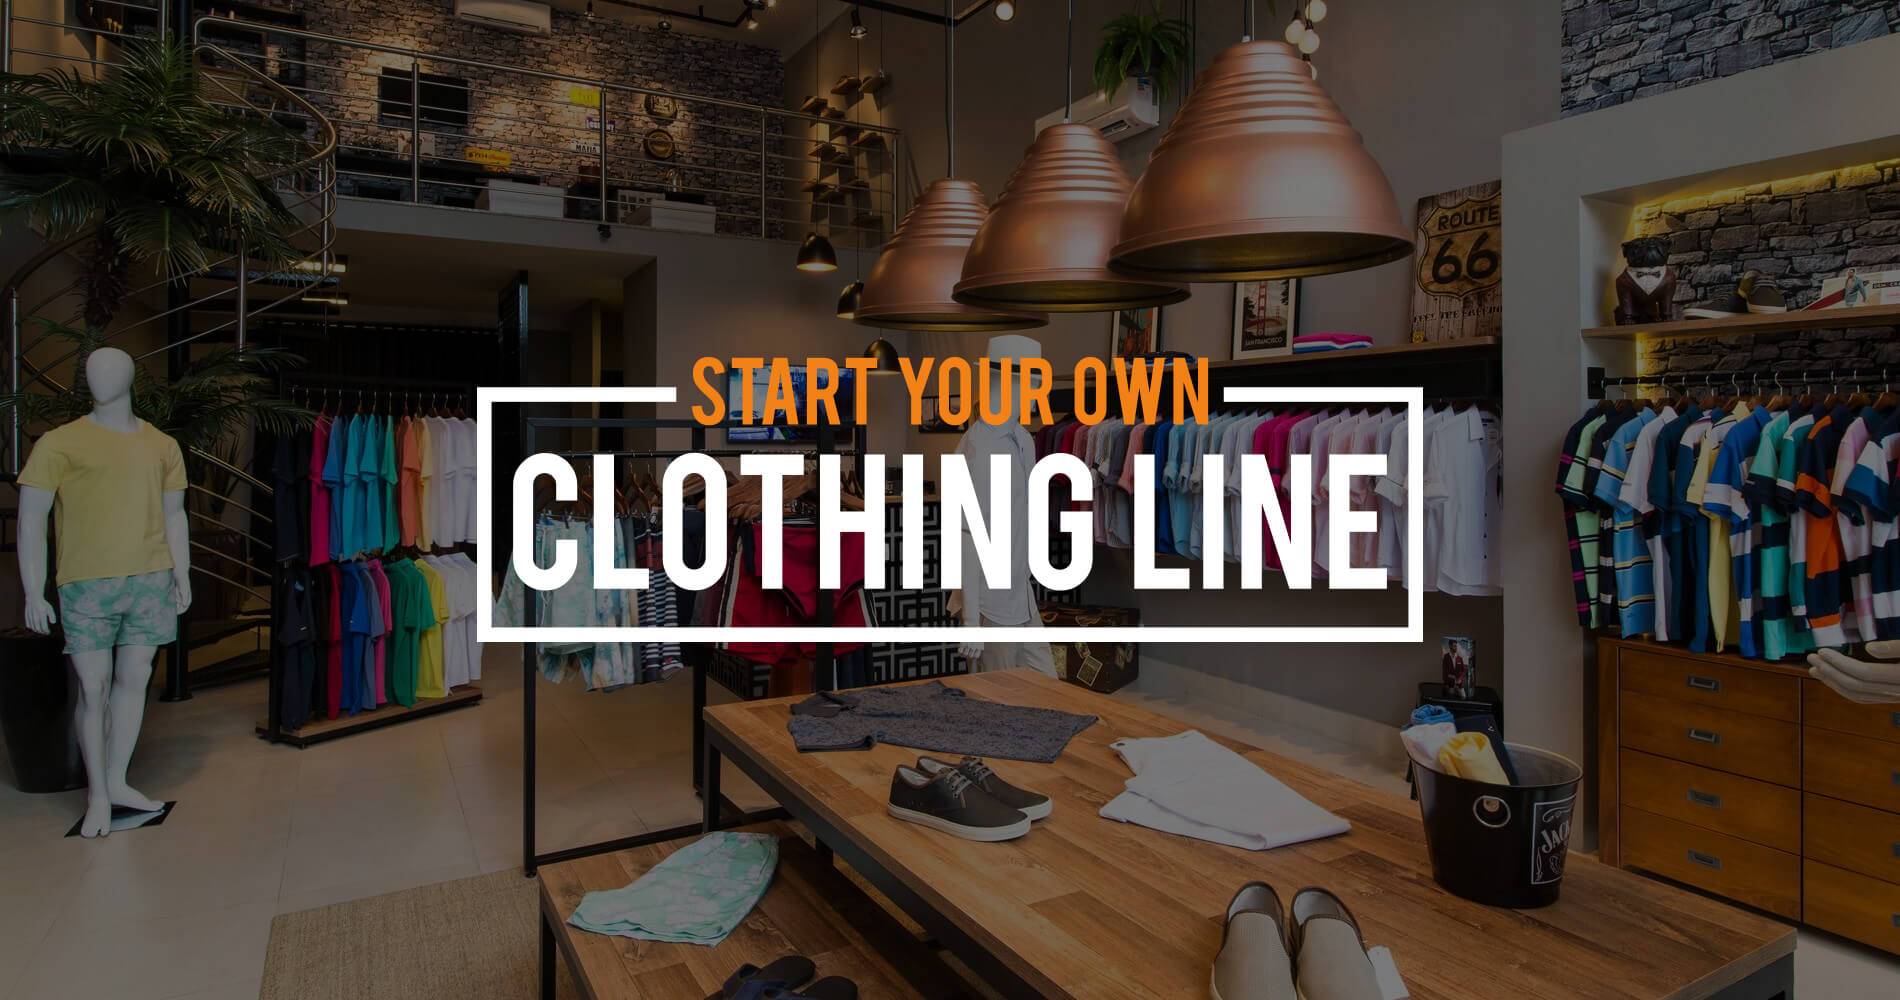 custom clothing manufacturers USA for startup